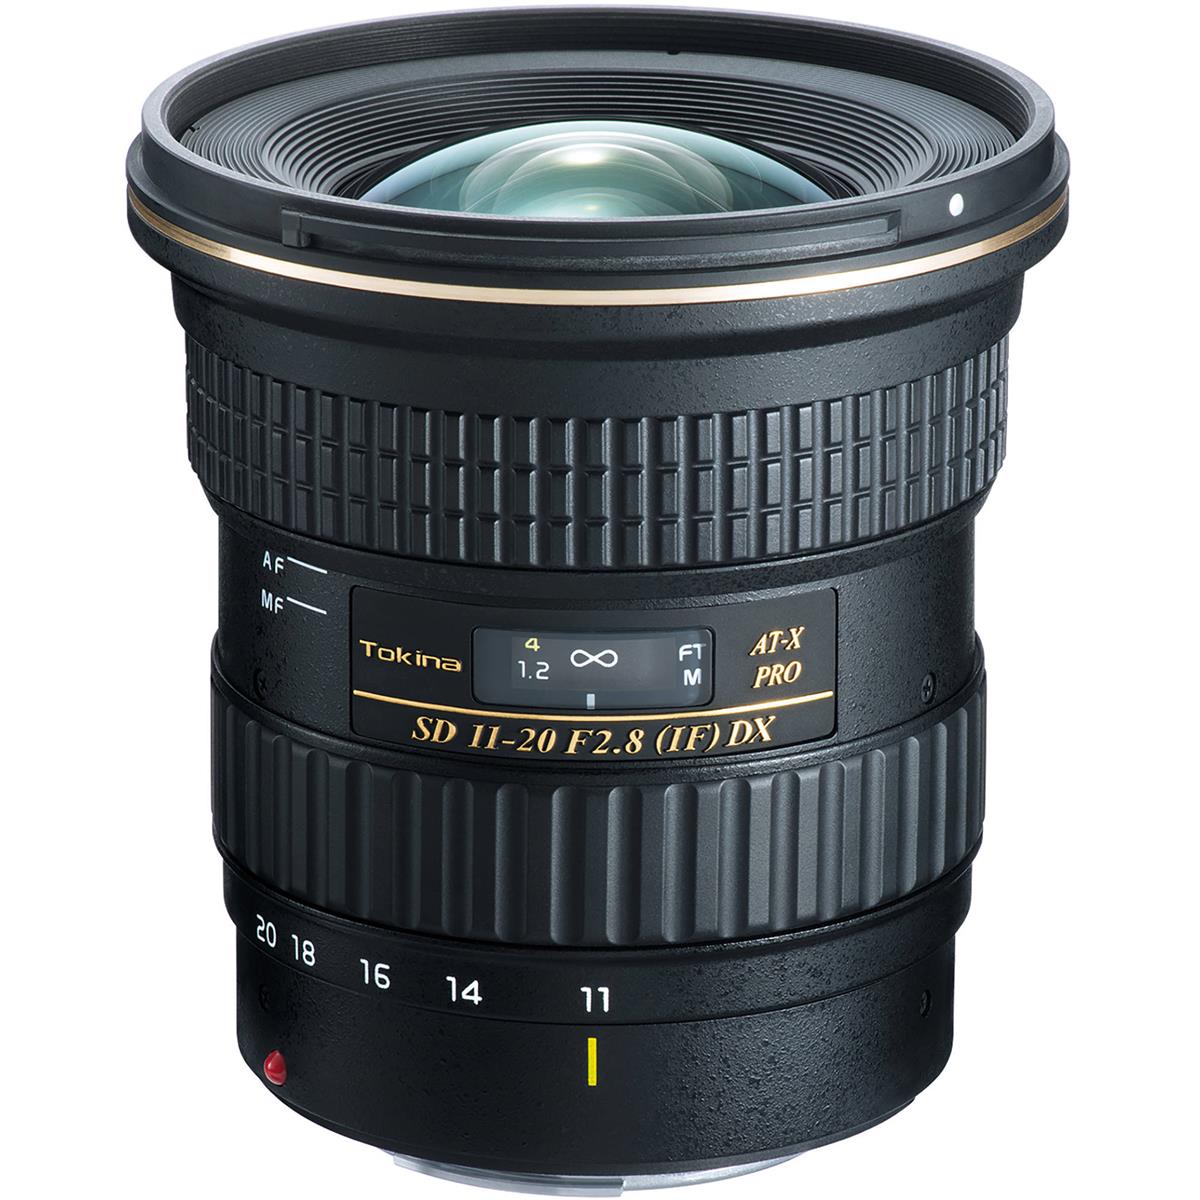 Tokina 11-20mm f/2.8 AT-X PRO DX Lens for Canon EF